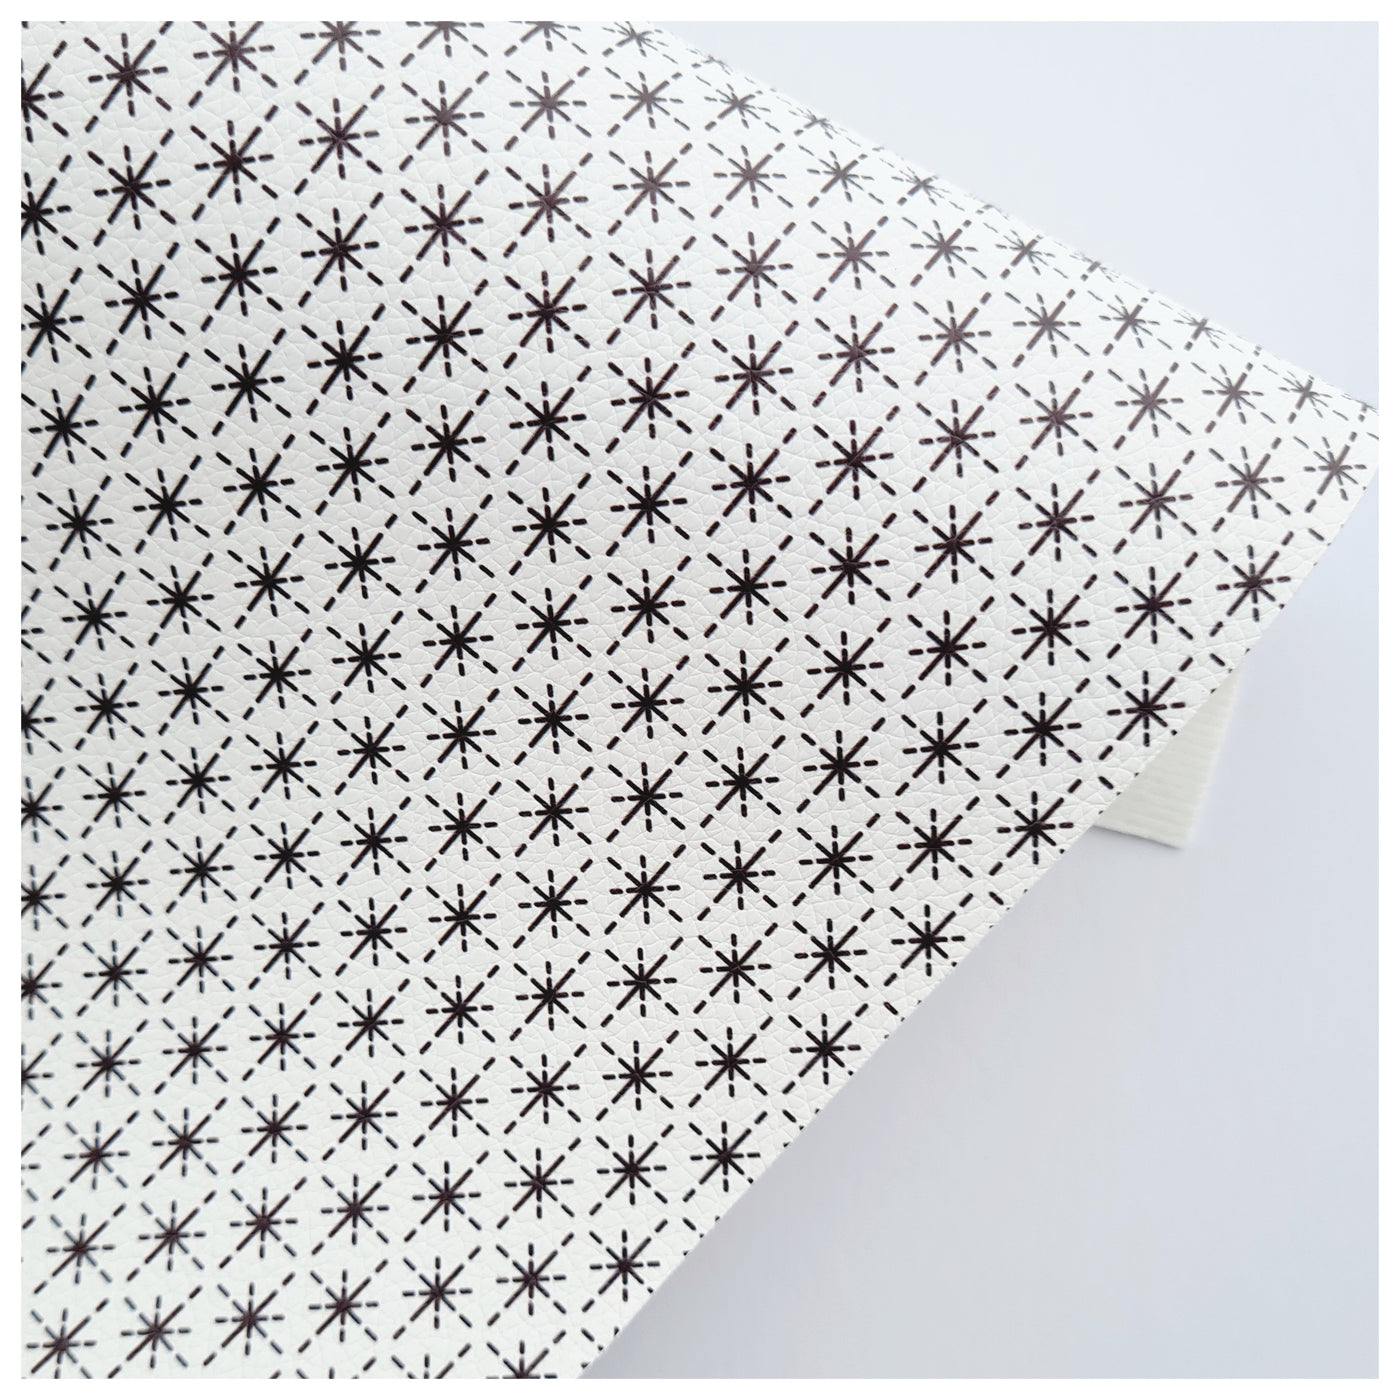 A4 Sheet of Black Starburst on White Litchi Leather